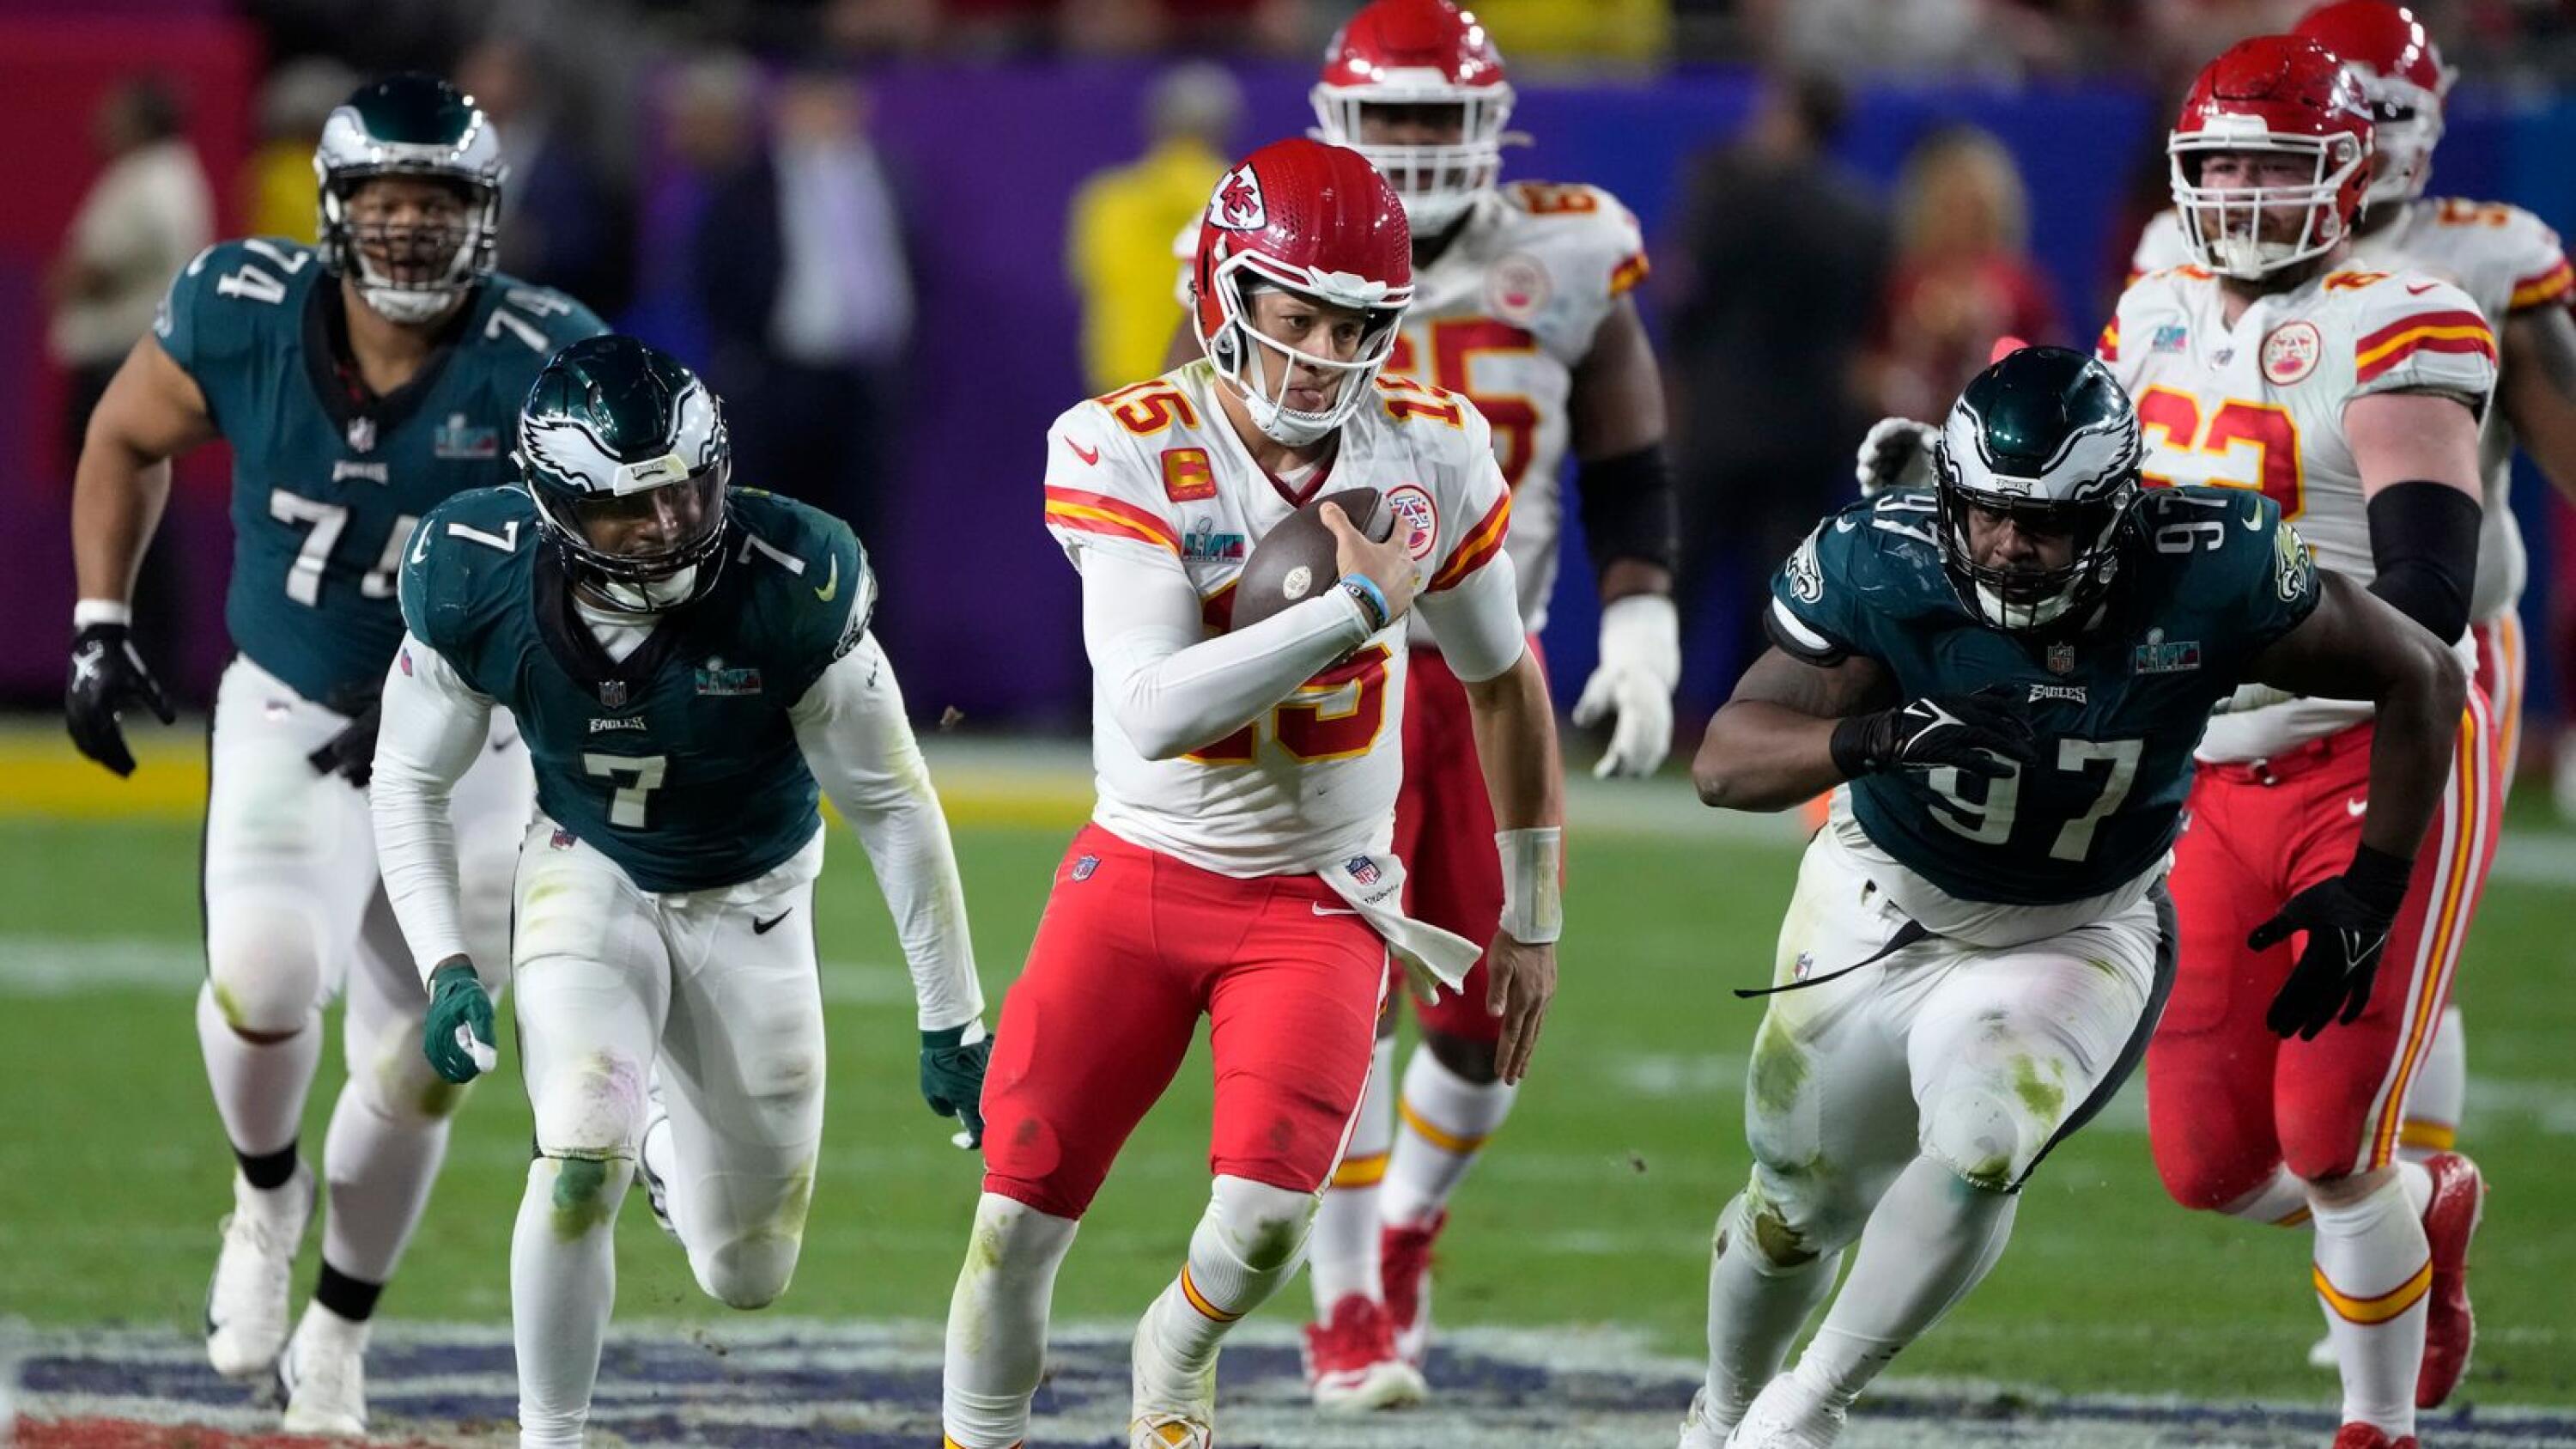 Inside the Numbers: Mahomes adds another Super Bowl comeback to his ledger